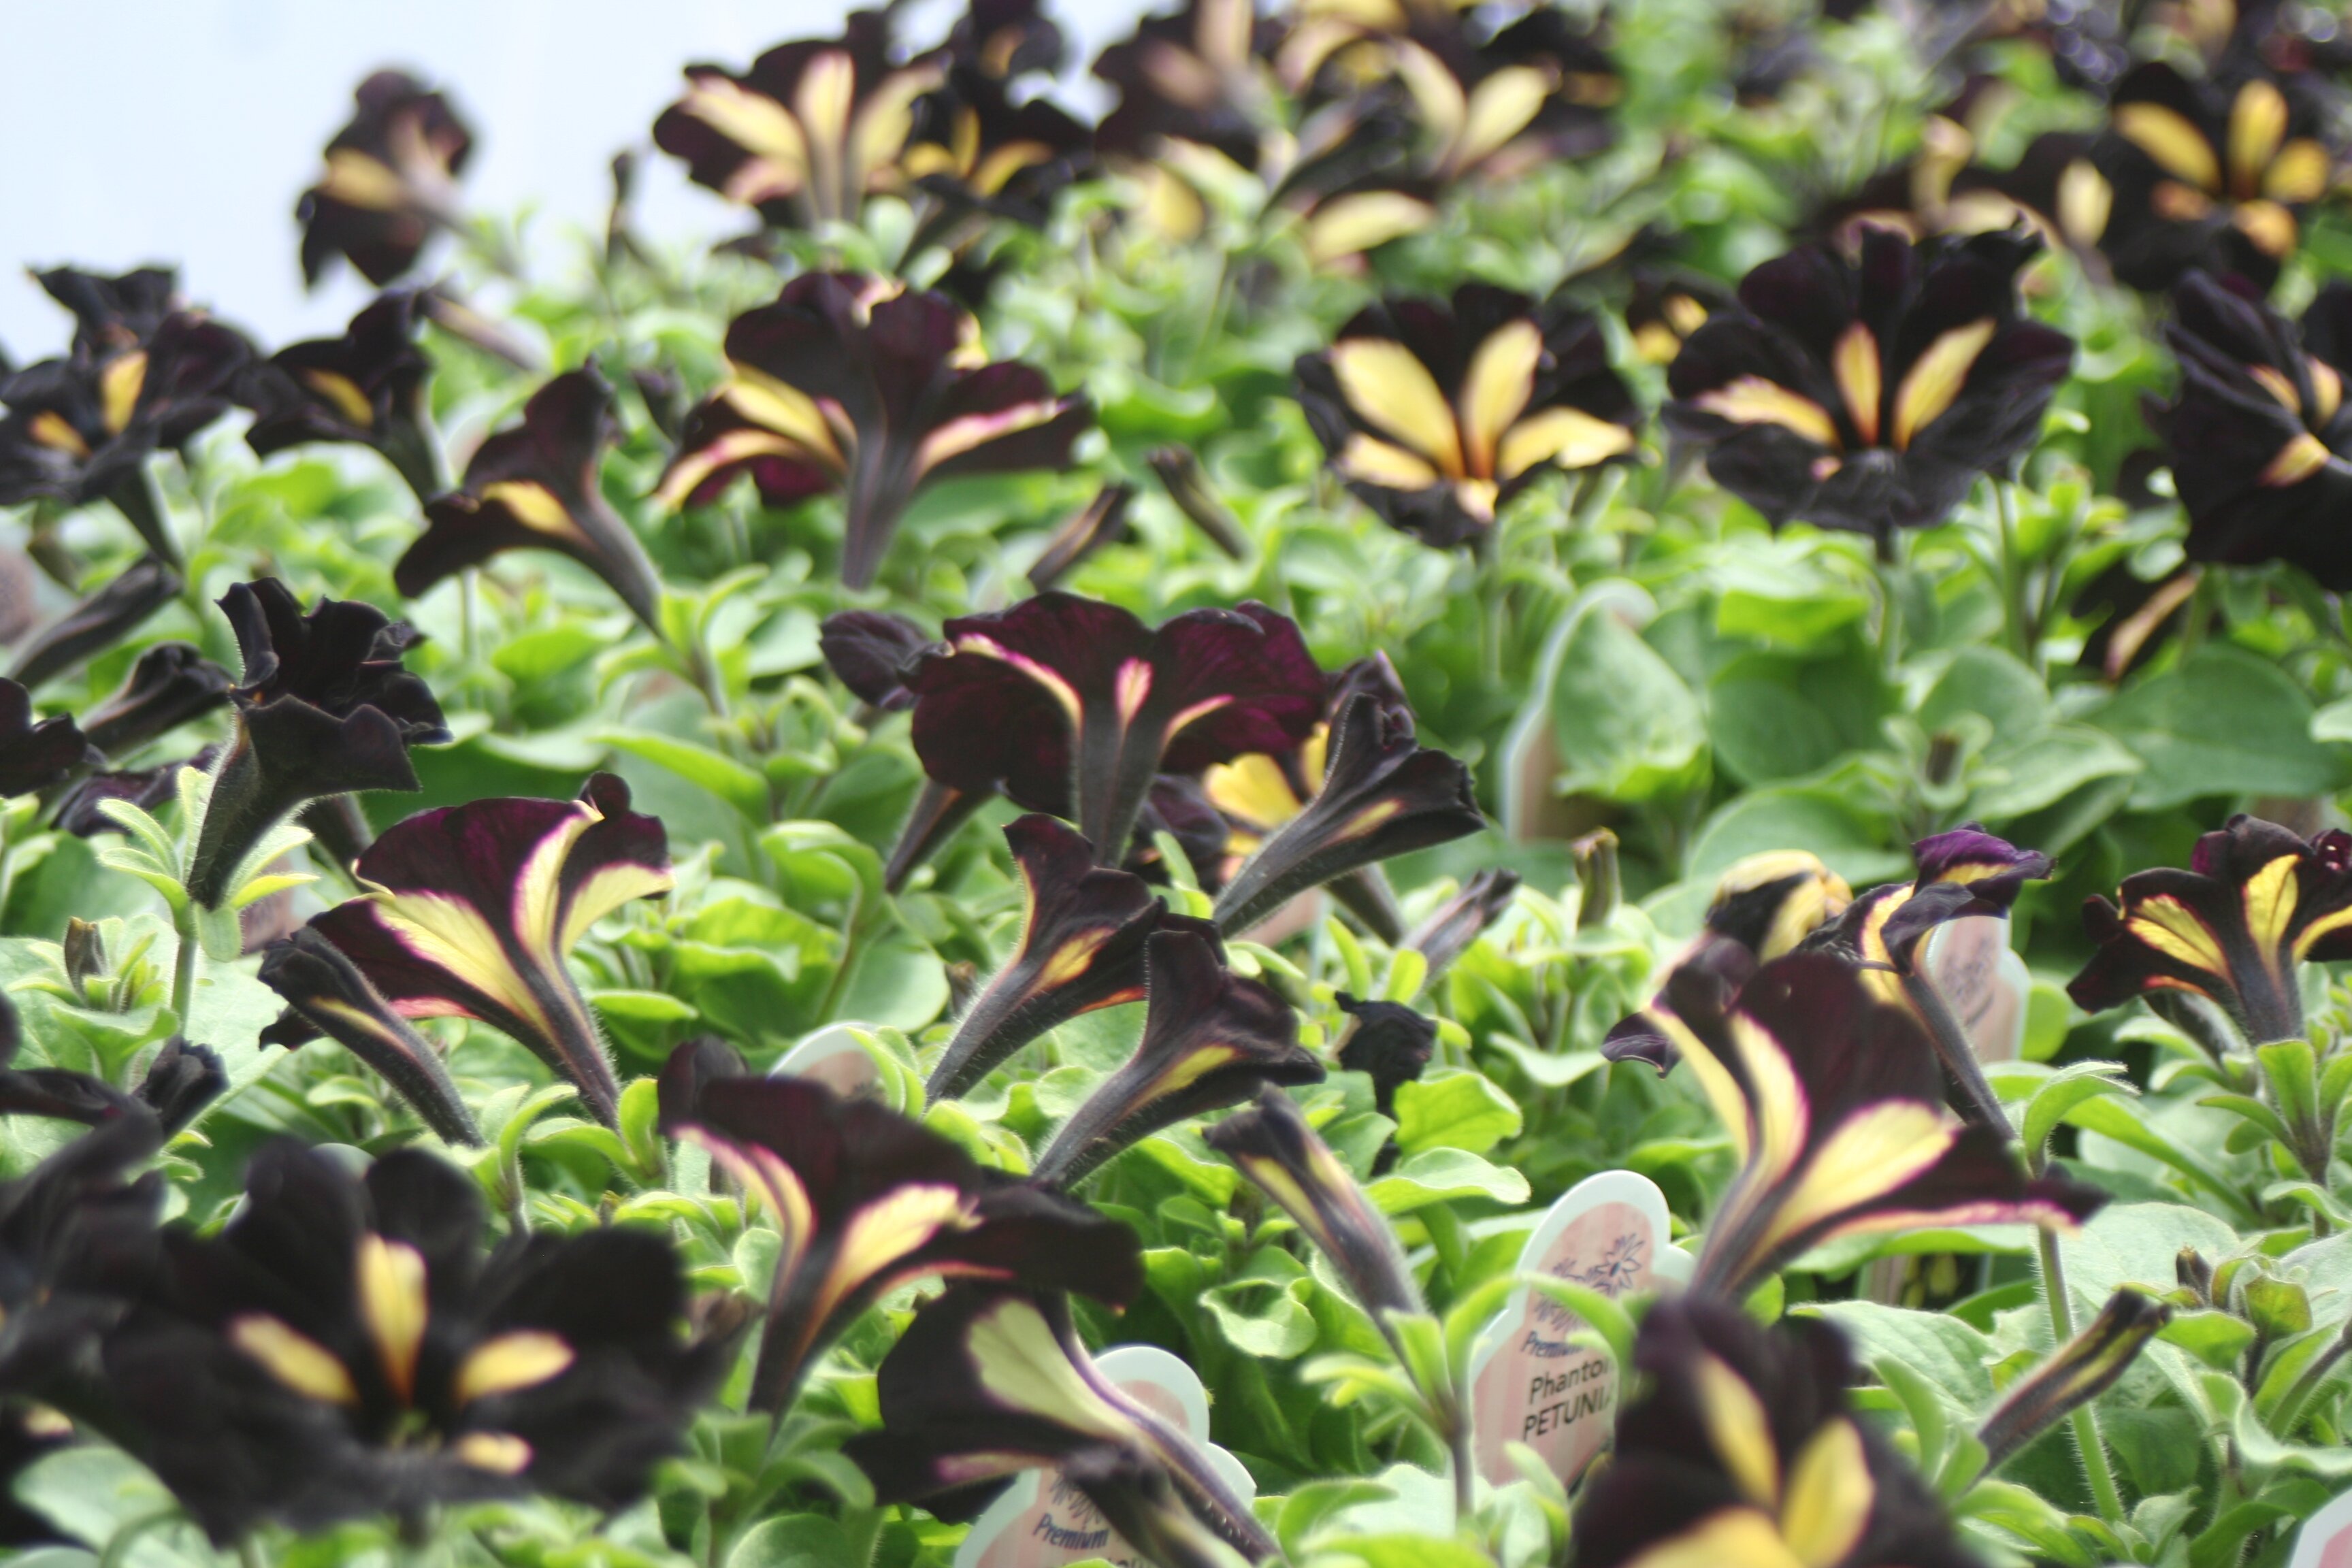 Close up of 'Phantom' Petunia- black with a limey-yellow star. One of the deepest blacks I've ever seen. Unbelievable!